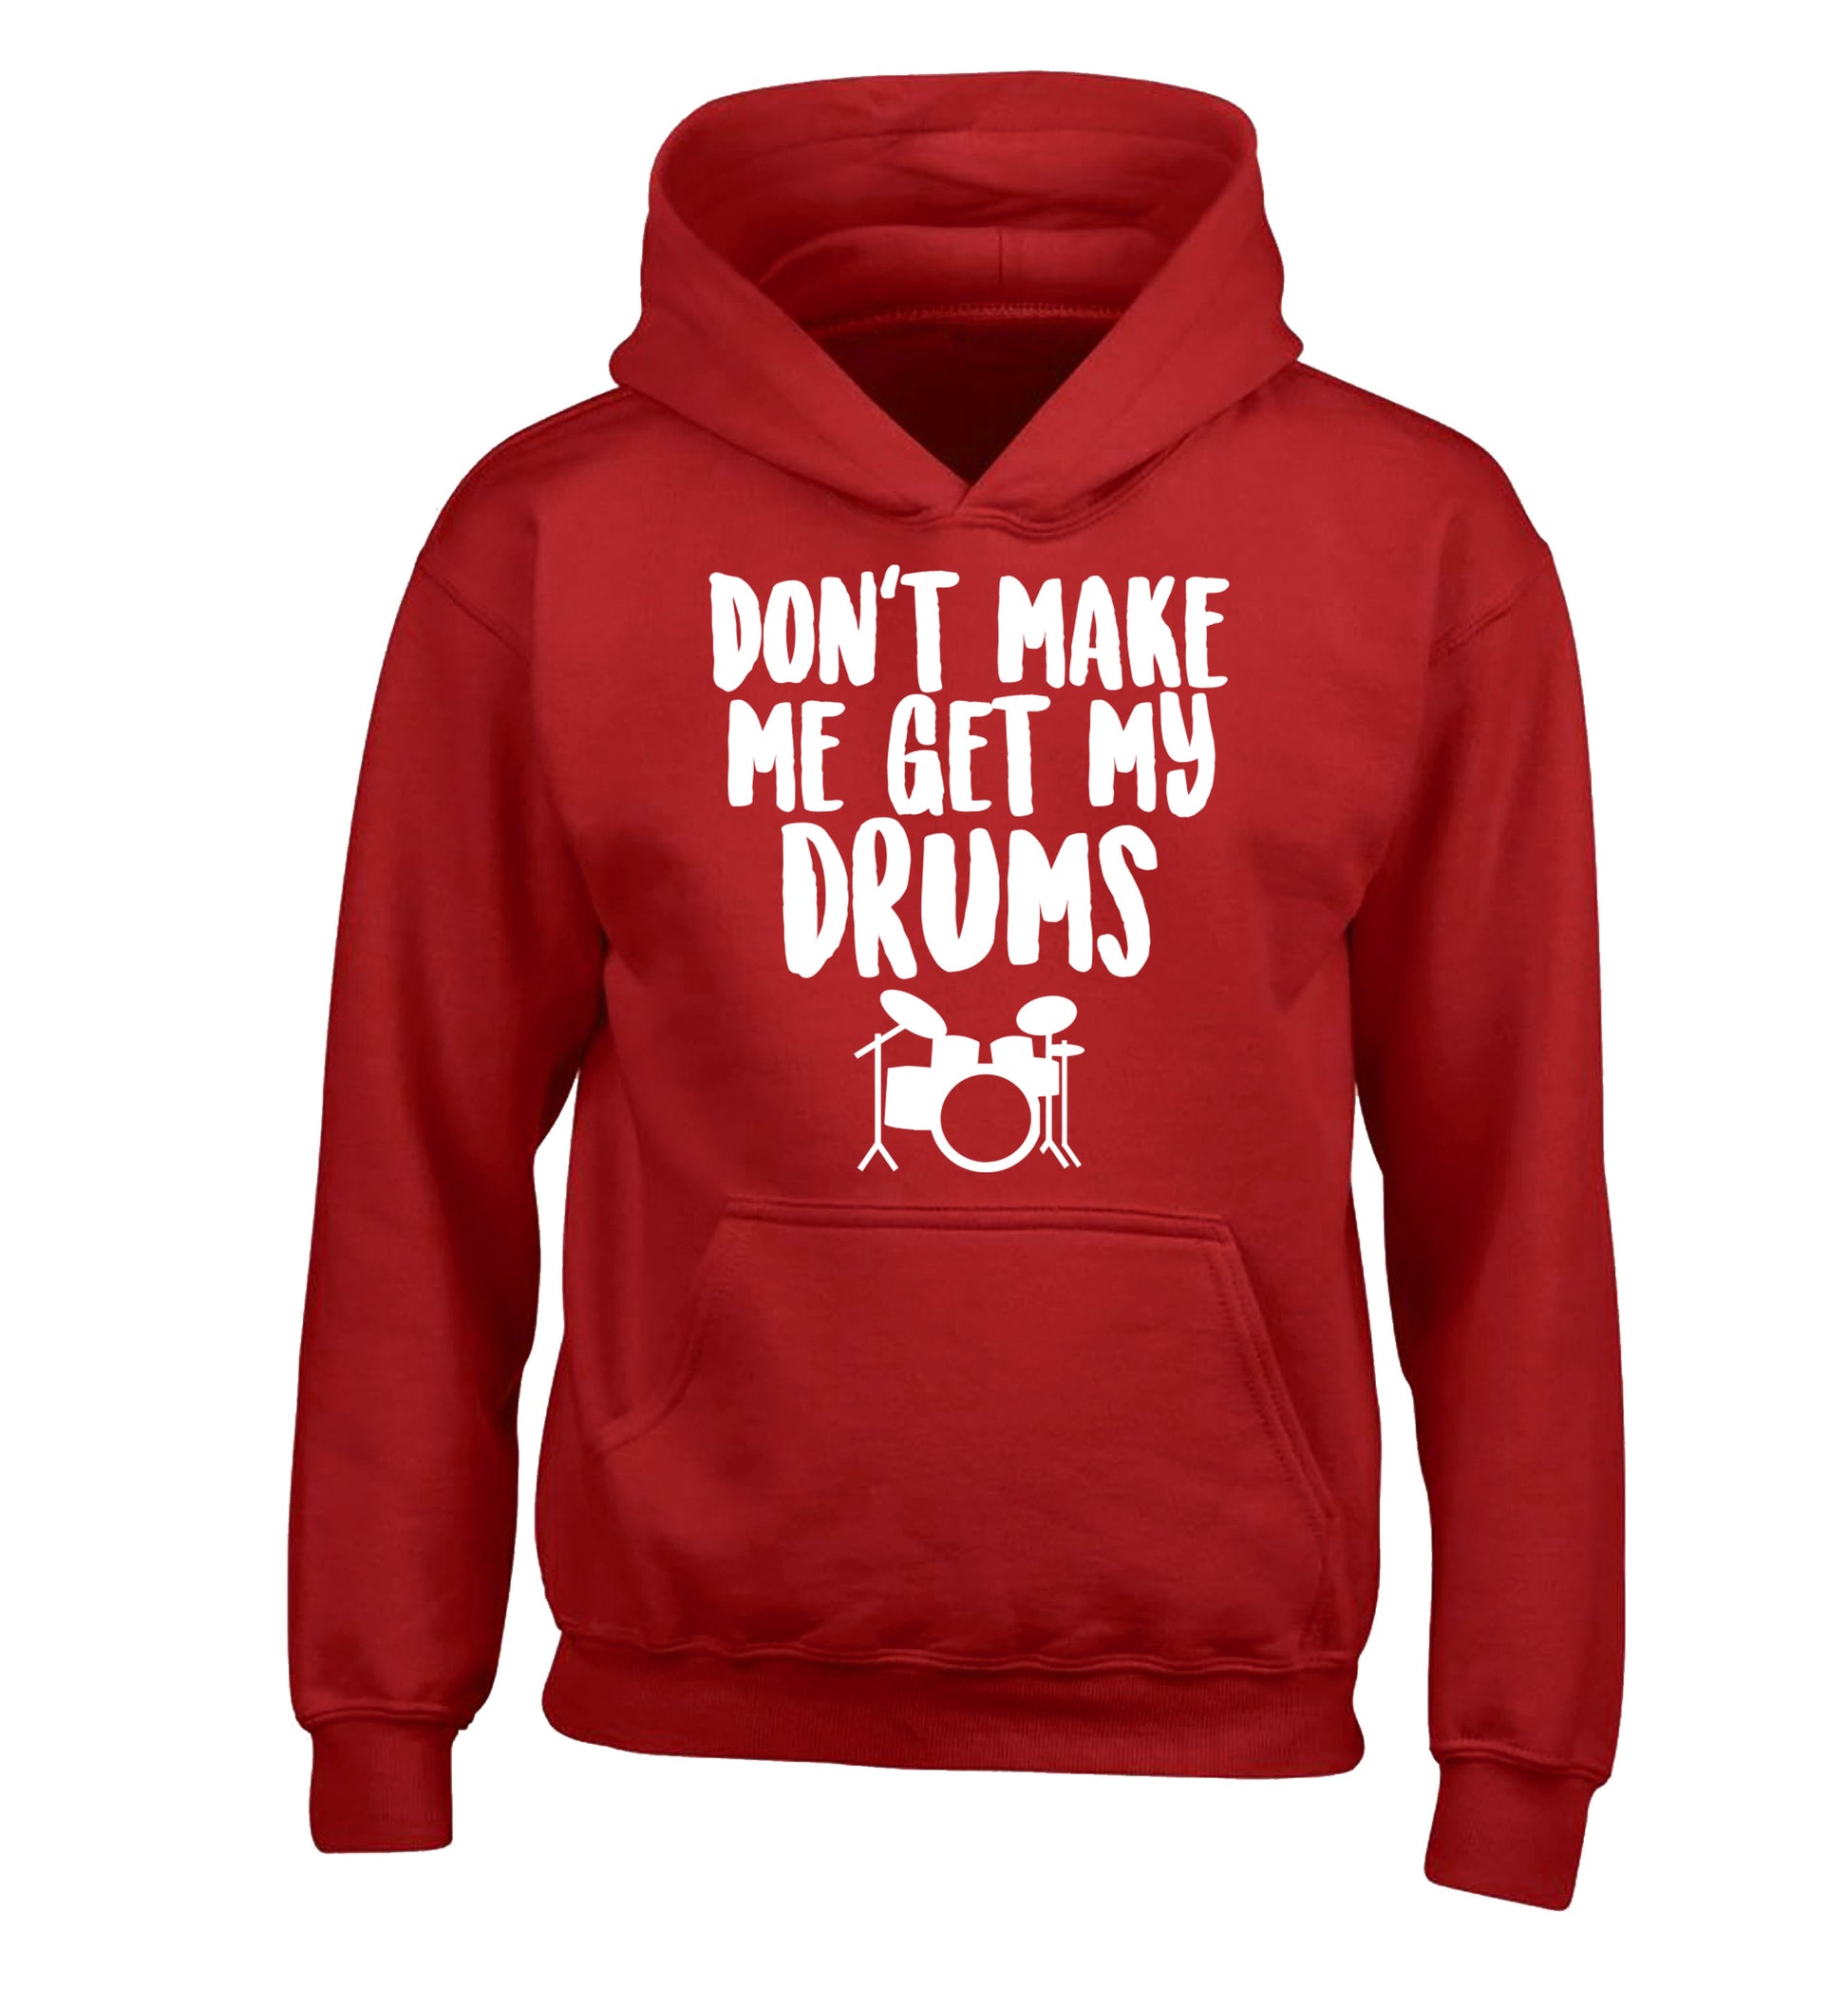 Don't make me get my drums children's red hoodie 12-14 Years